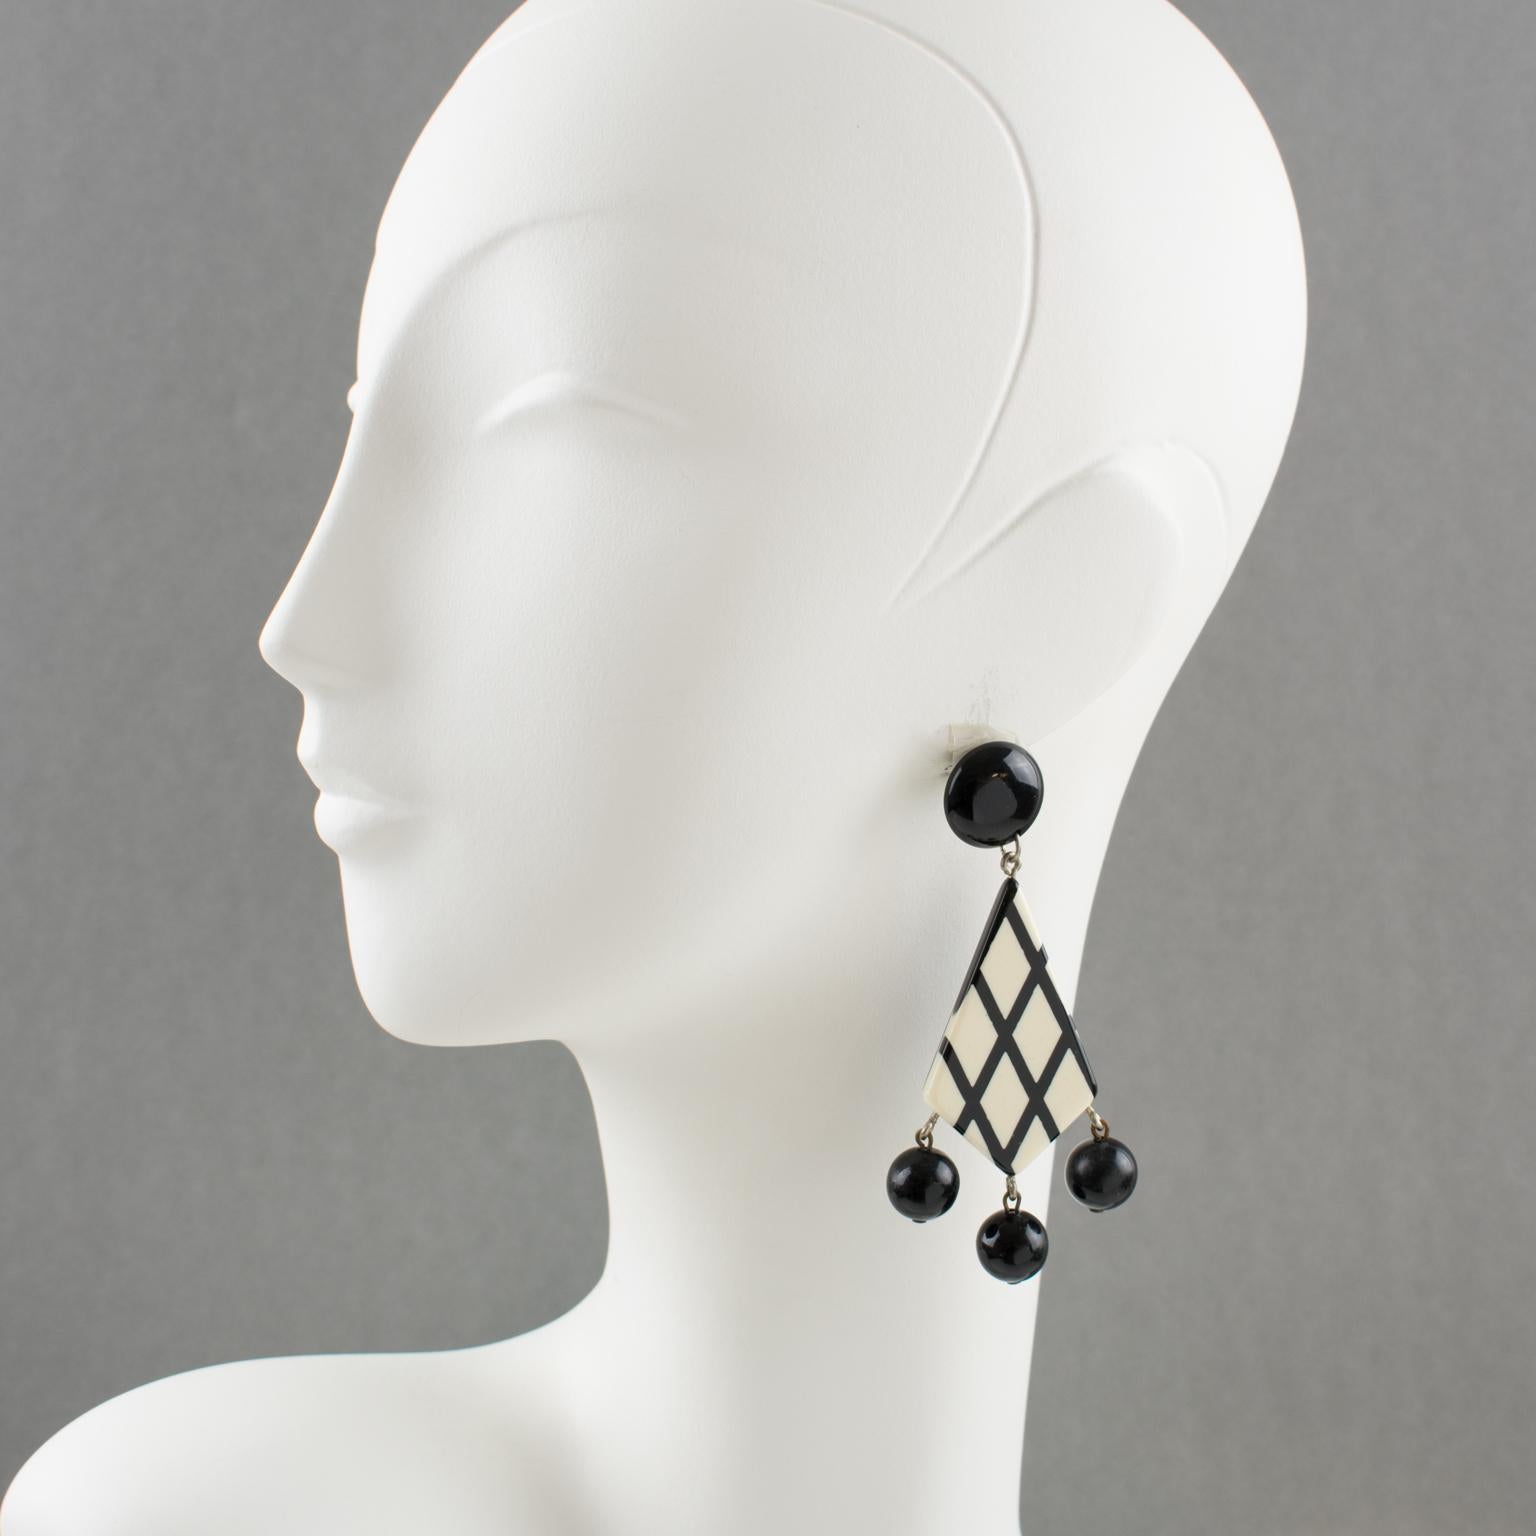 These lovely French Lucite pierced dangling earrings feature a geometric shape with a contrasting black and white checkerboard striped pattern ornate with three black bead charms. The pieces are for pierced ears. There is no visible maker's